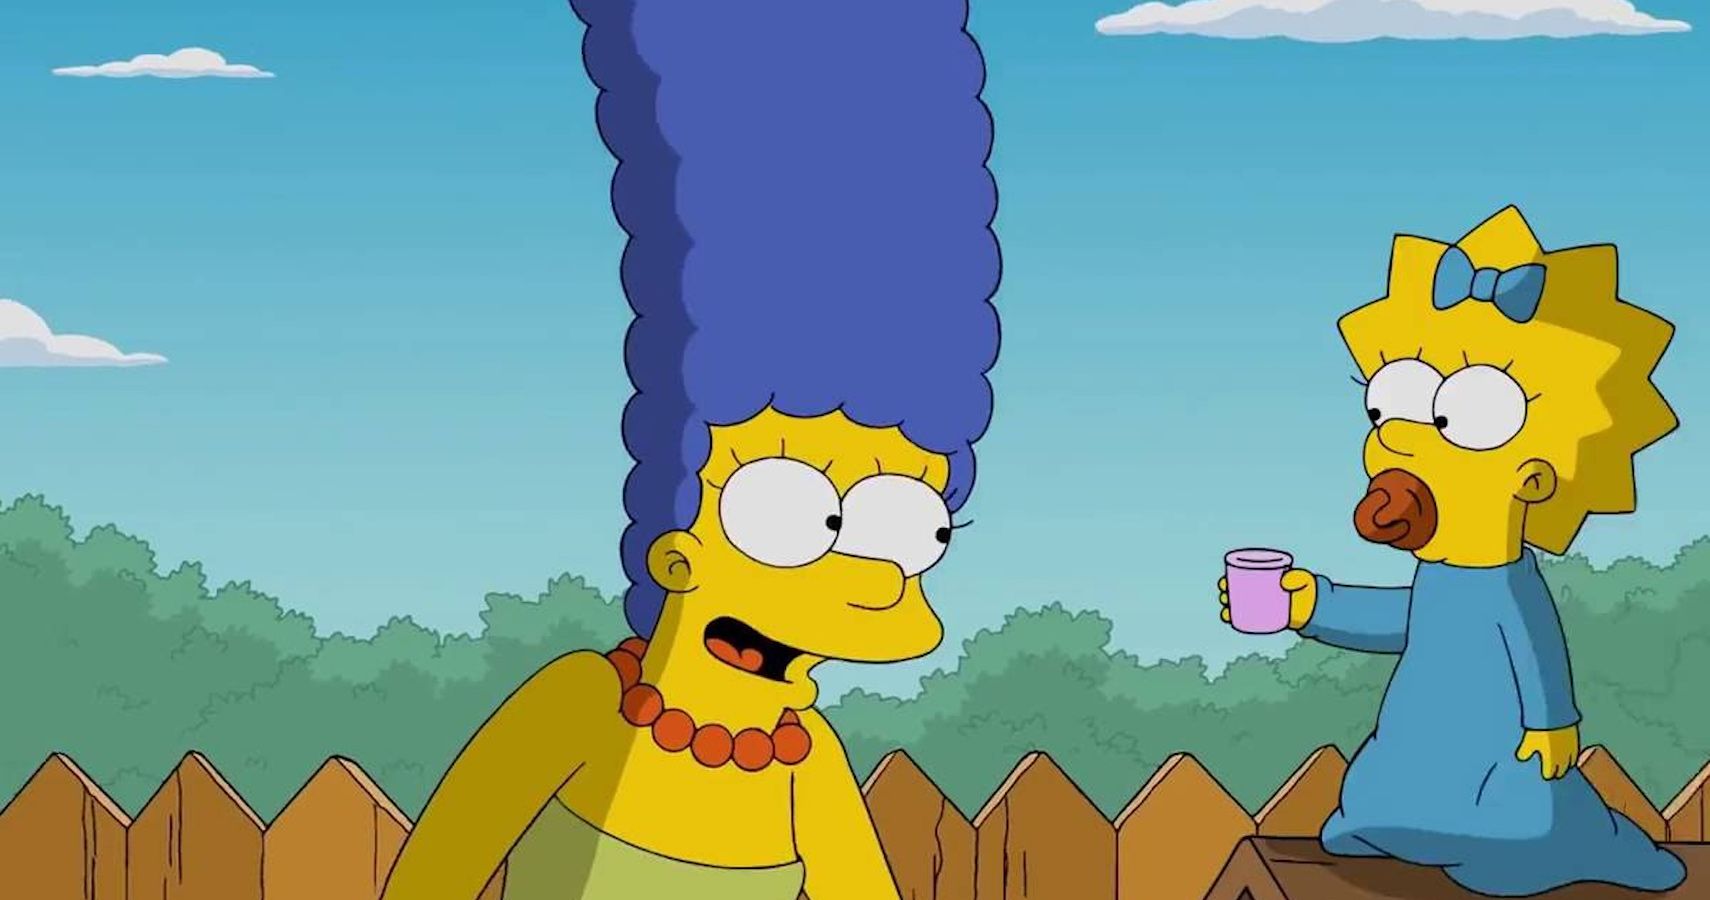 marge voice change